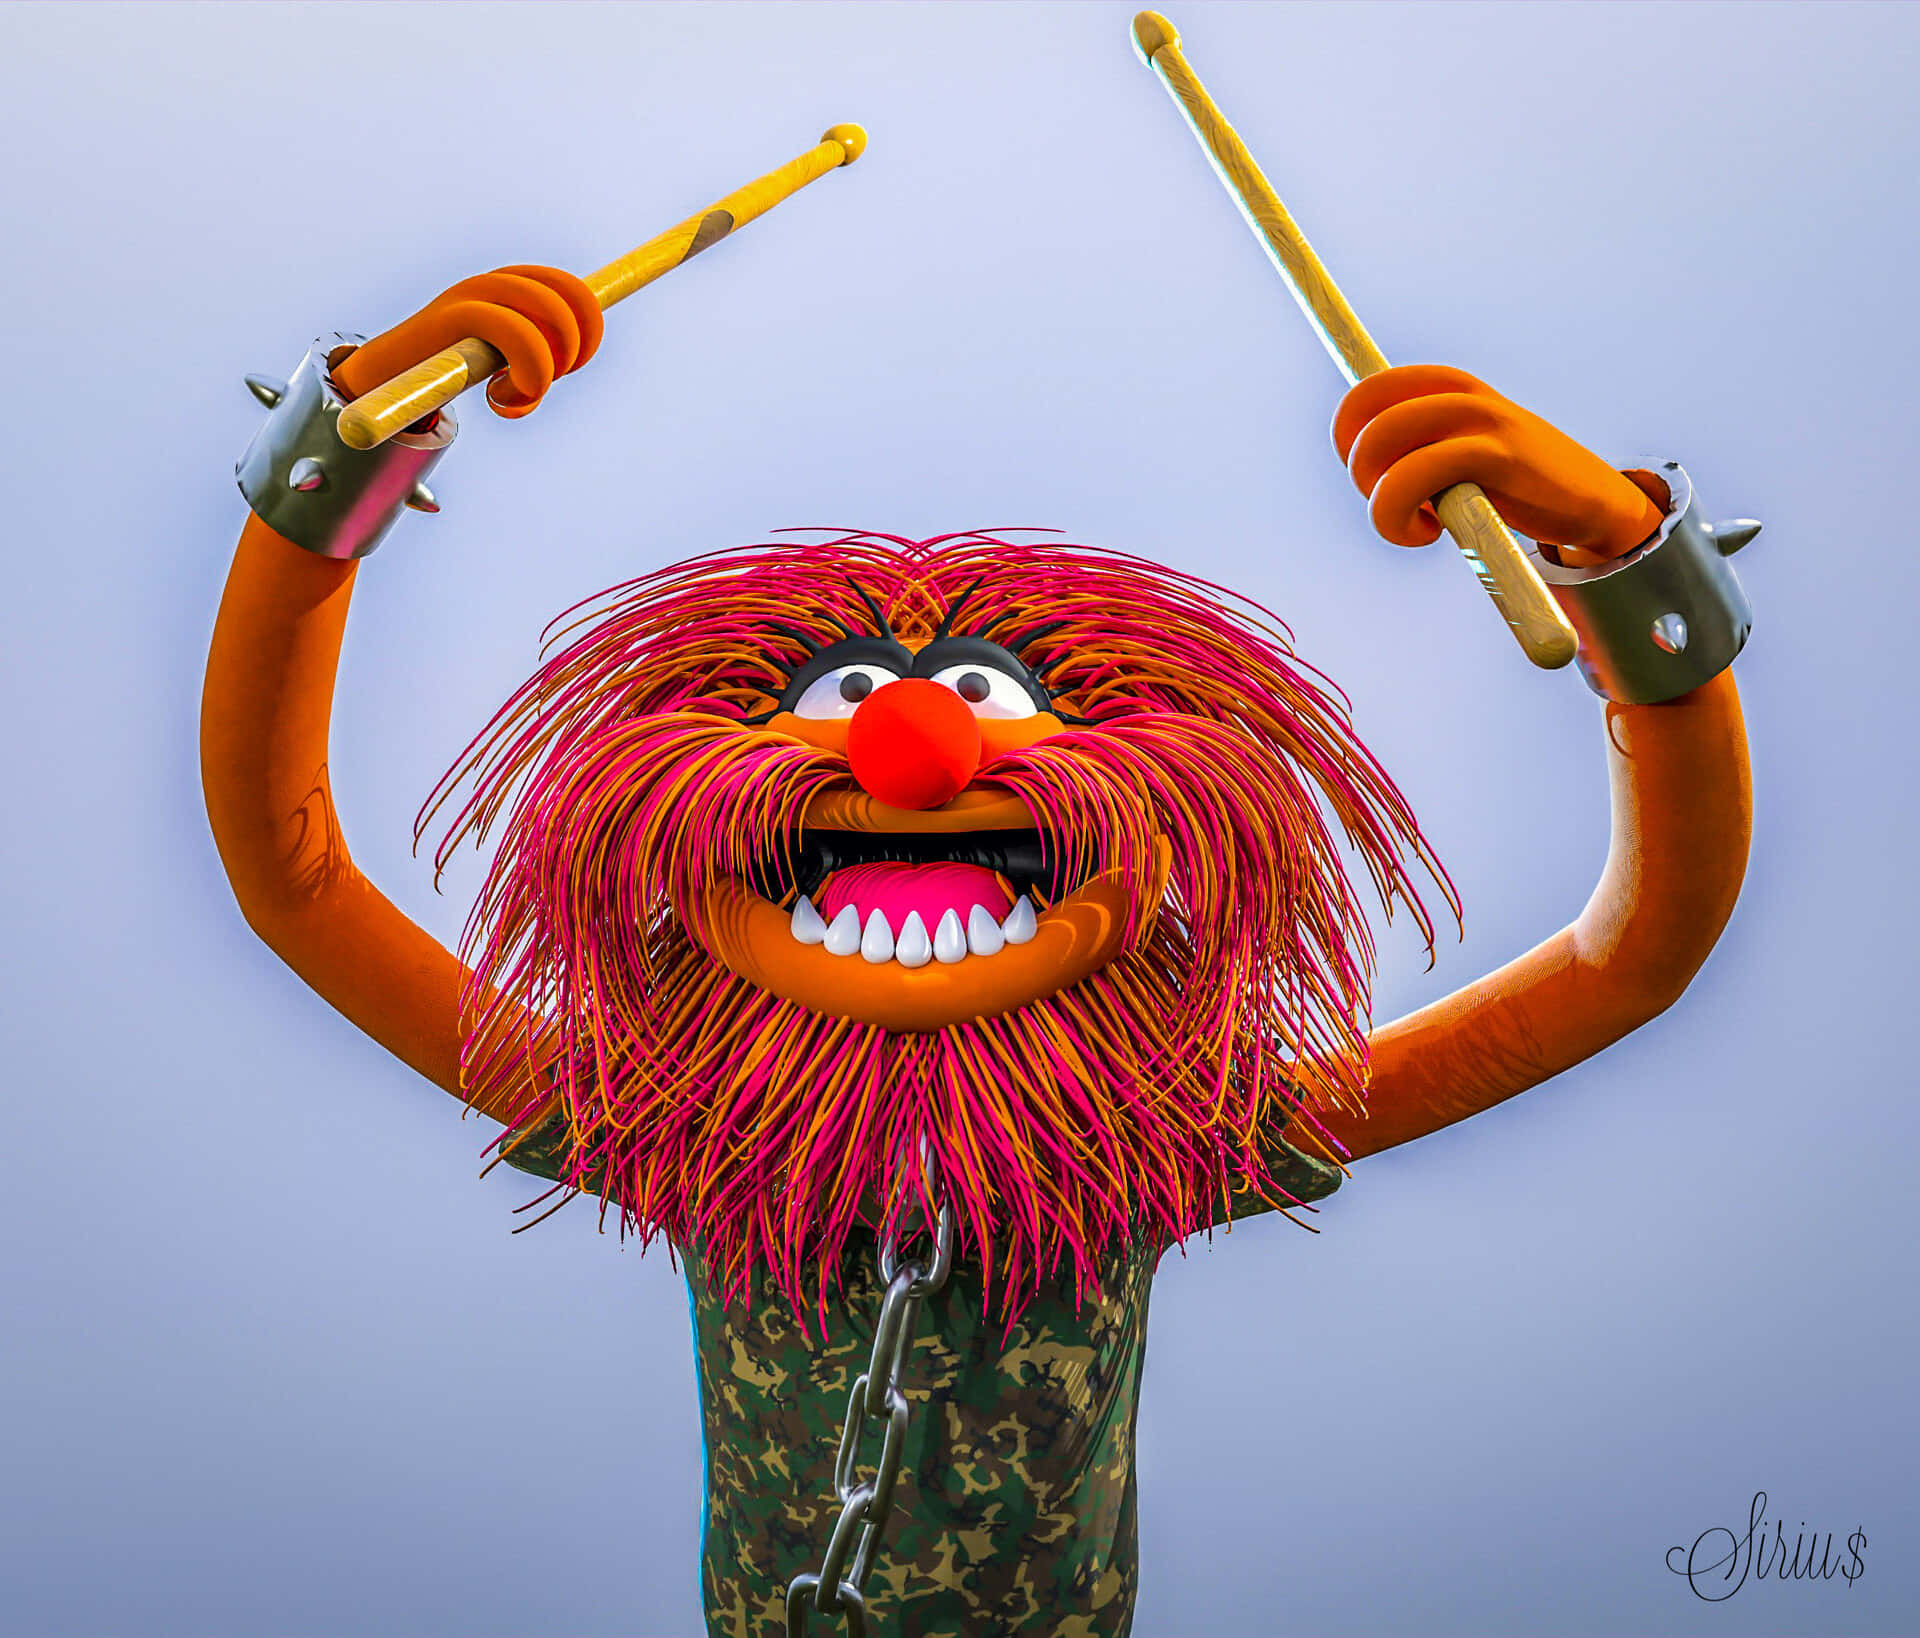 Catch Animal Muppet Live in Action Wallpaper